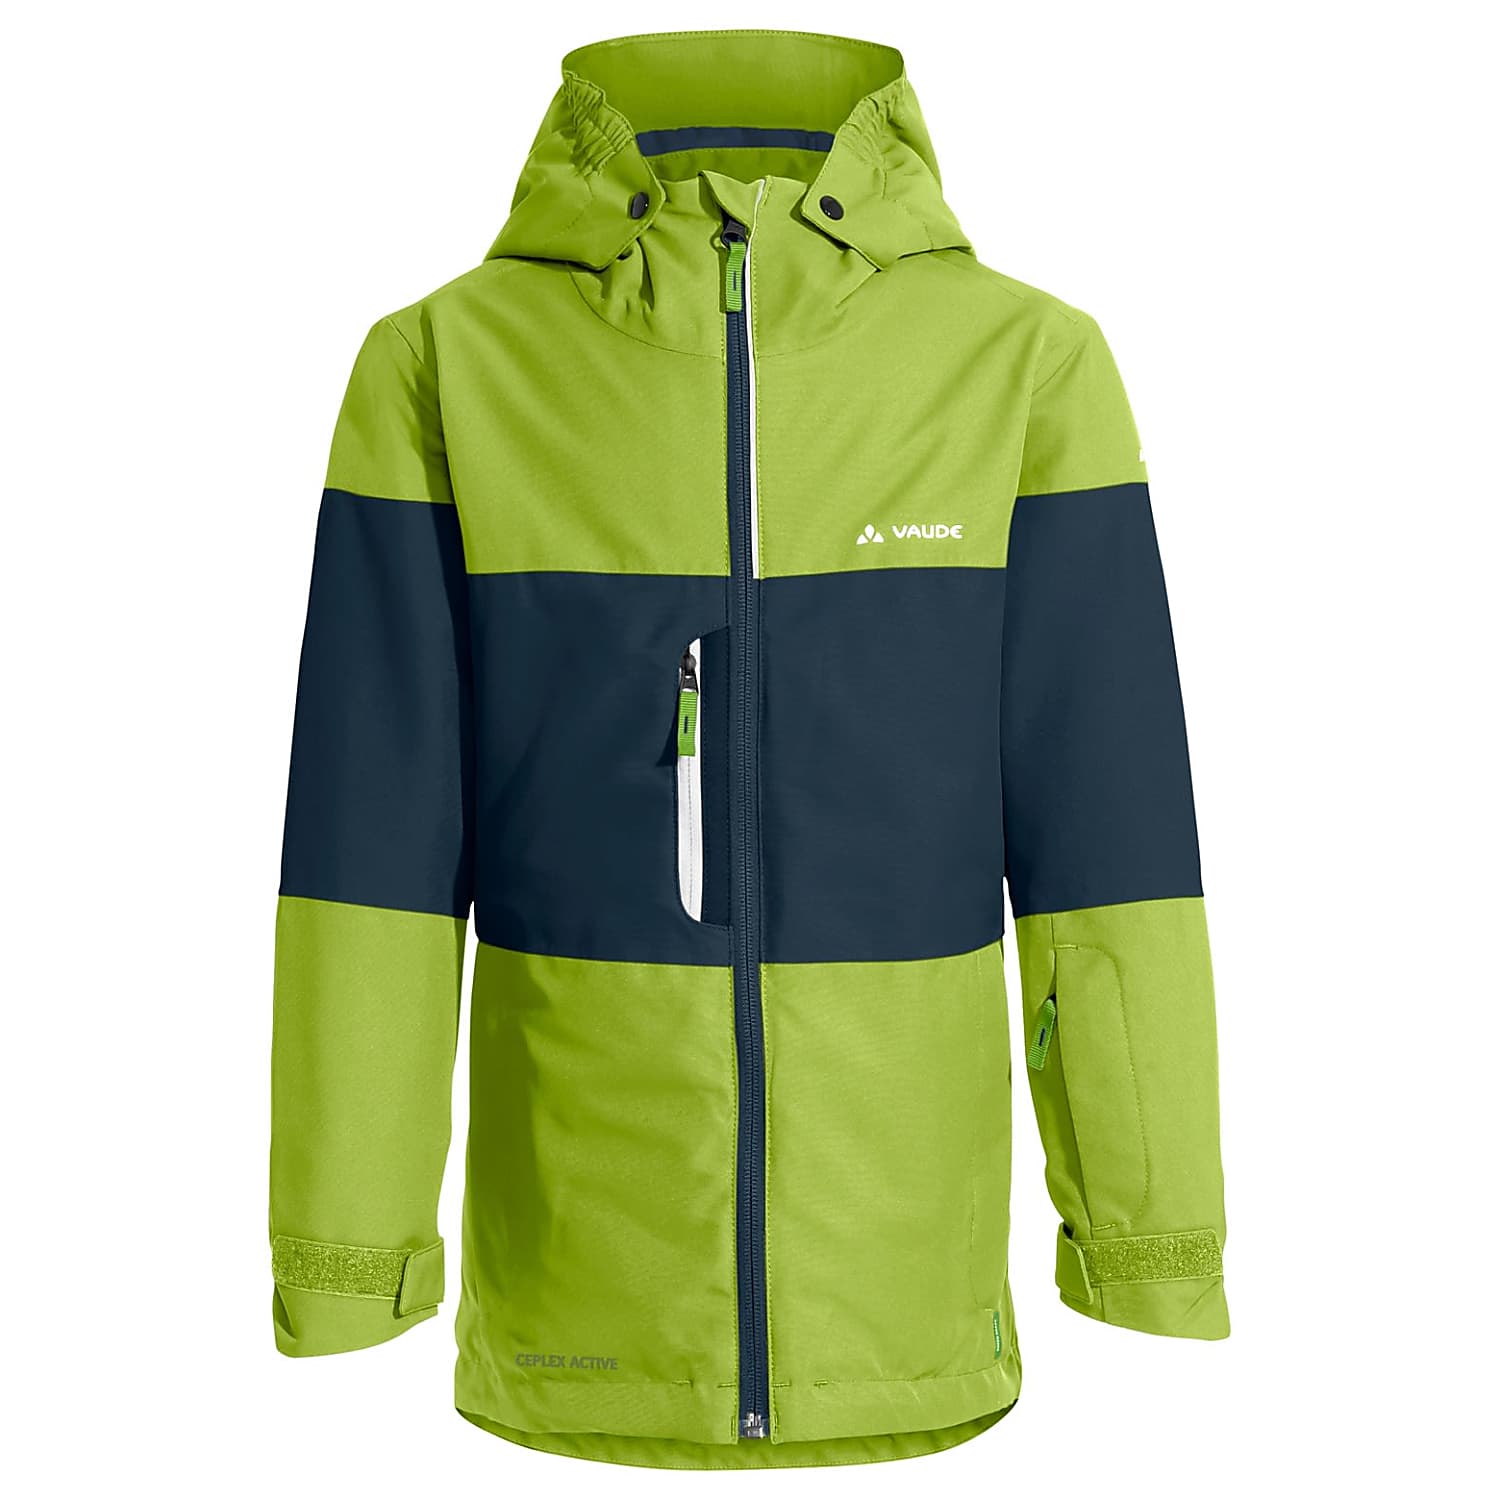 CUP and JACKET, SNOW Chute Green Fast Vaude cheap KIDS - shipping